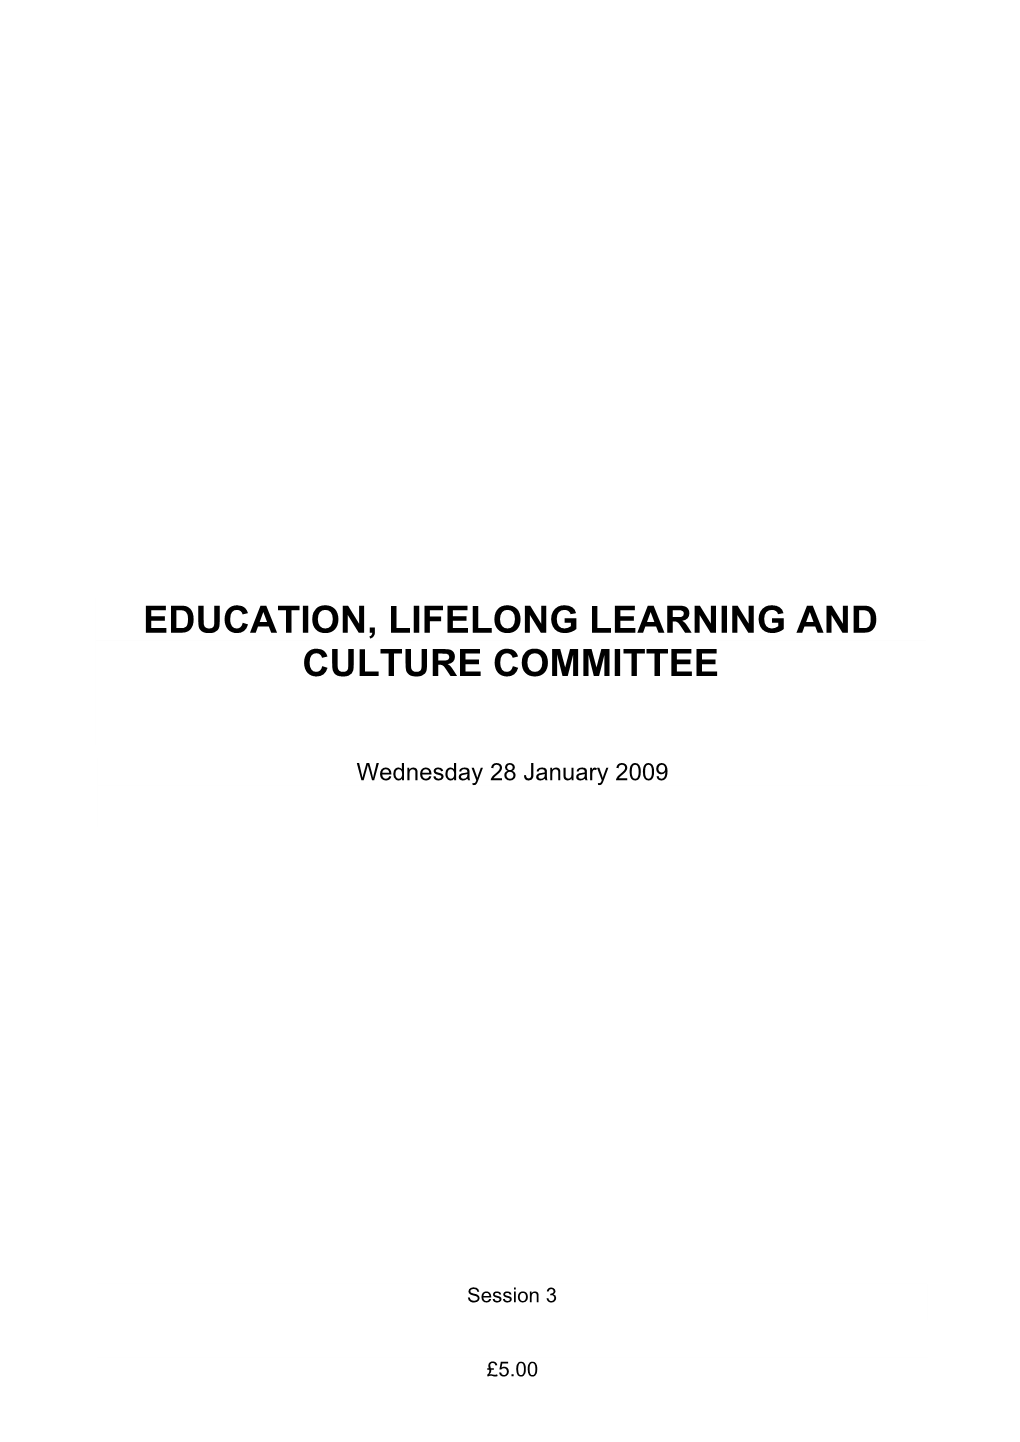 Education, Lifelong Learning and Culture Committee